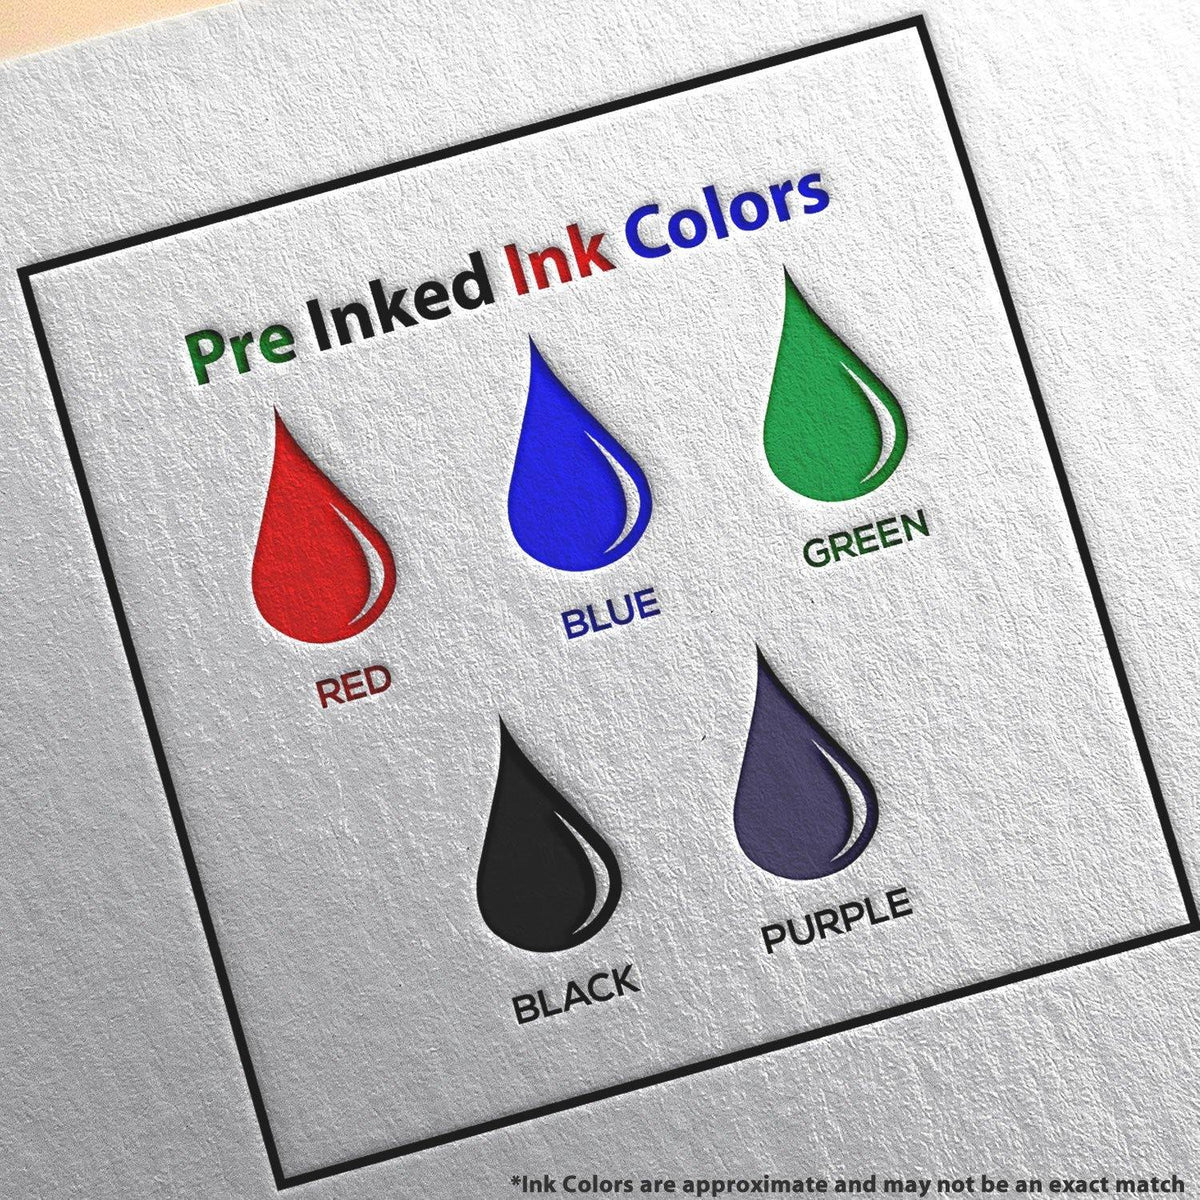 Large Pre-Inked Paid with Date Line Stamp Ink Color Options